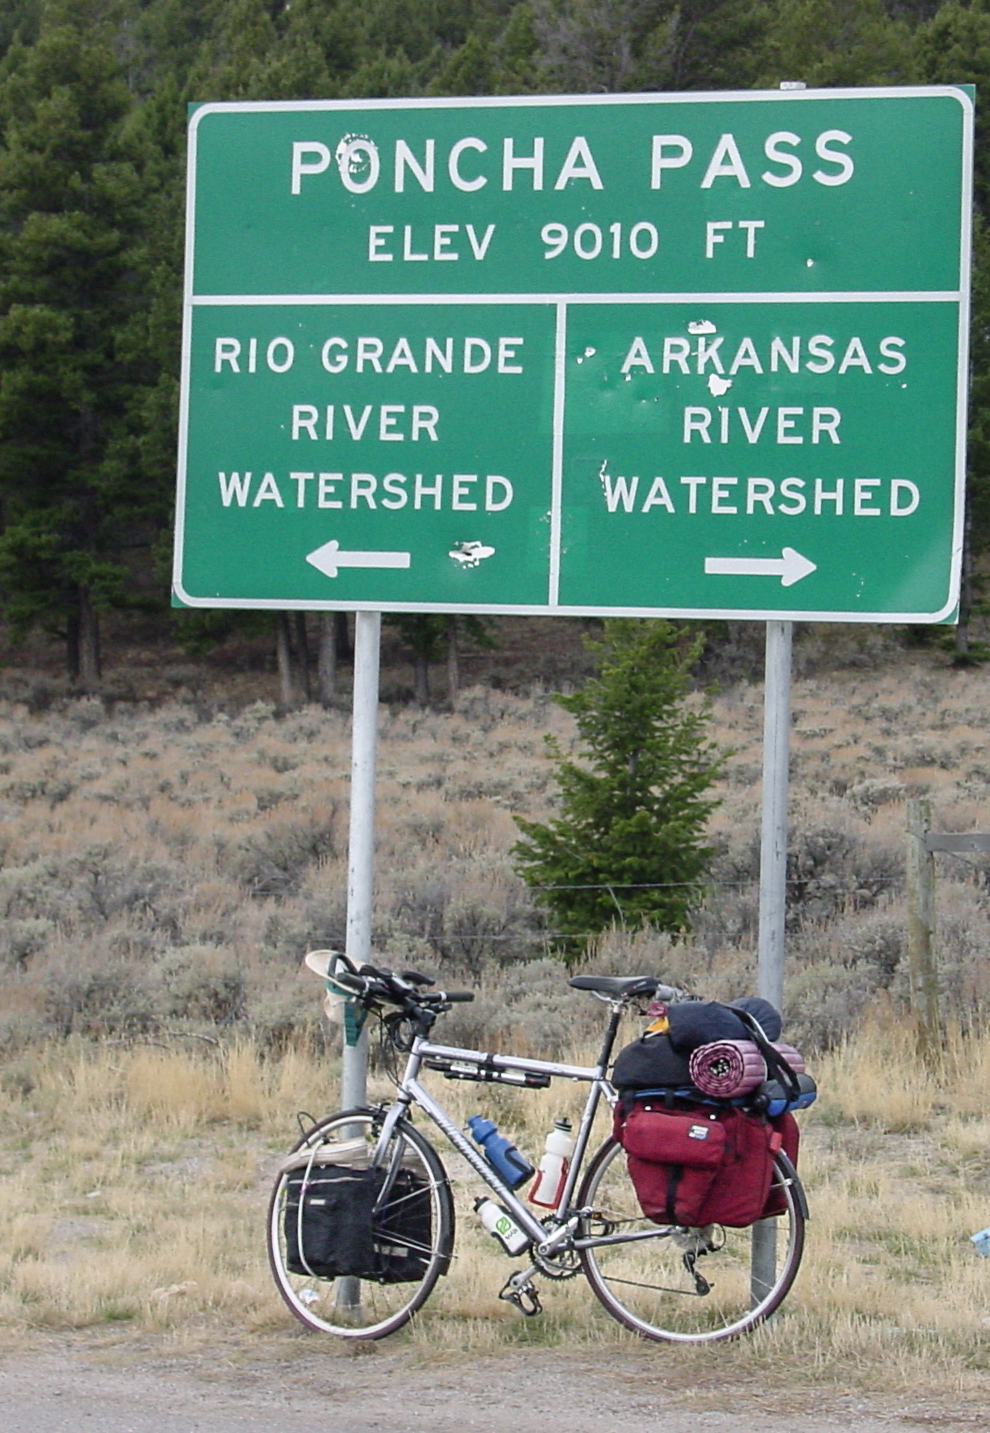 Bicycle leans on a sign that says:PONCHA PASS ELEV 9,010 FT. Arrow pointing left says: RIO GRANDE RIVER WATERSHED; Arrow pointing right says: ARKANSAS RIVER WATERSHED